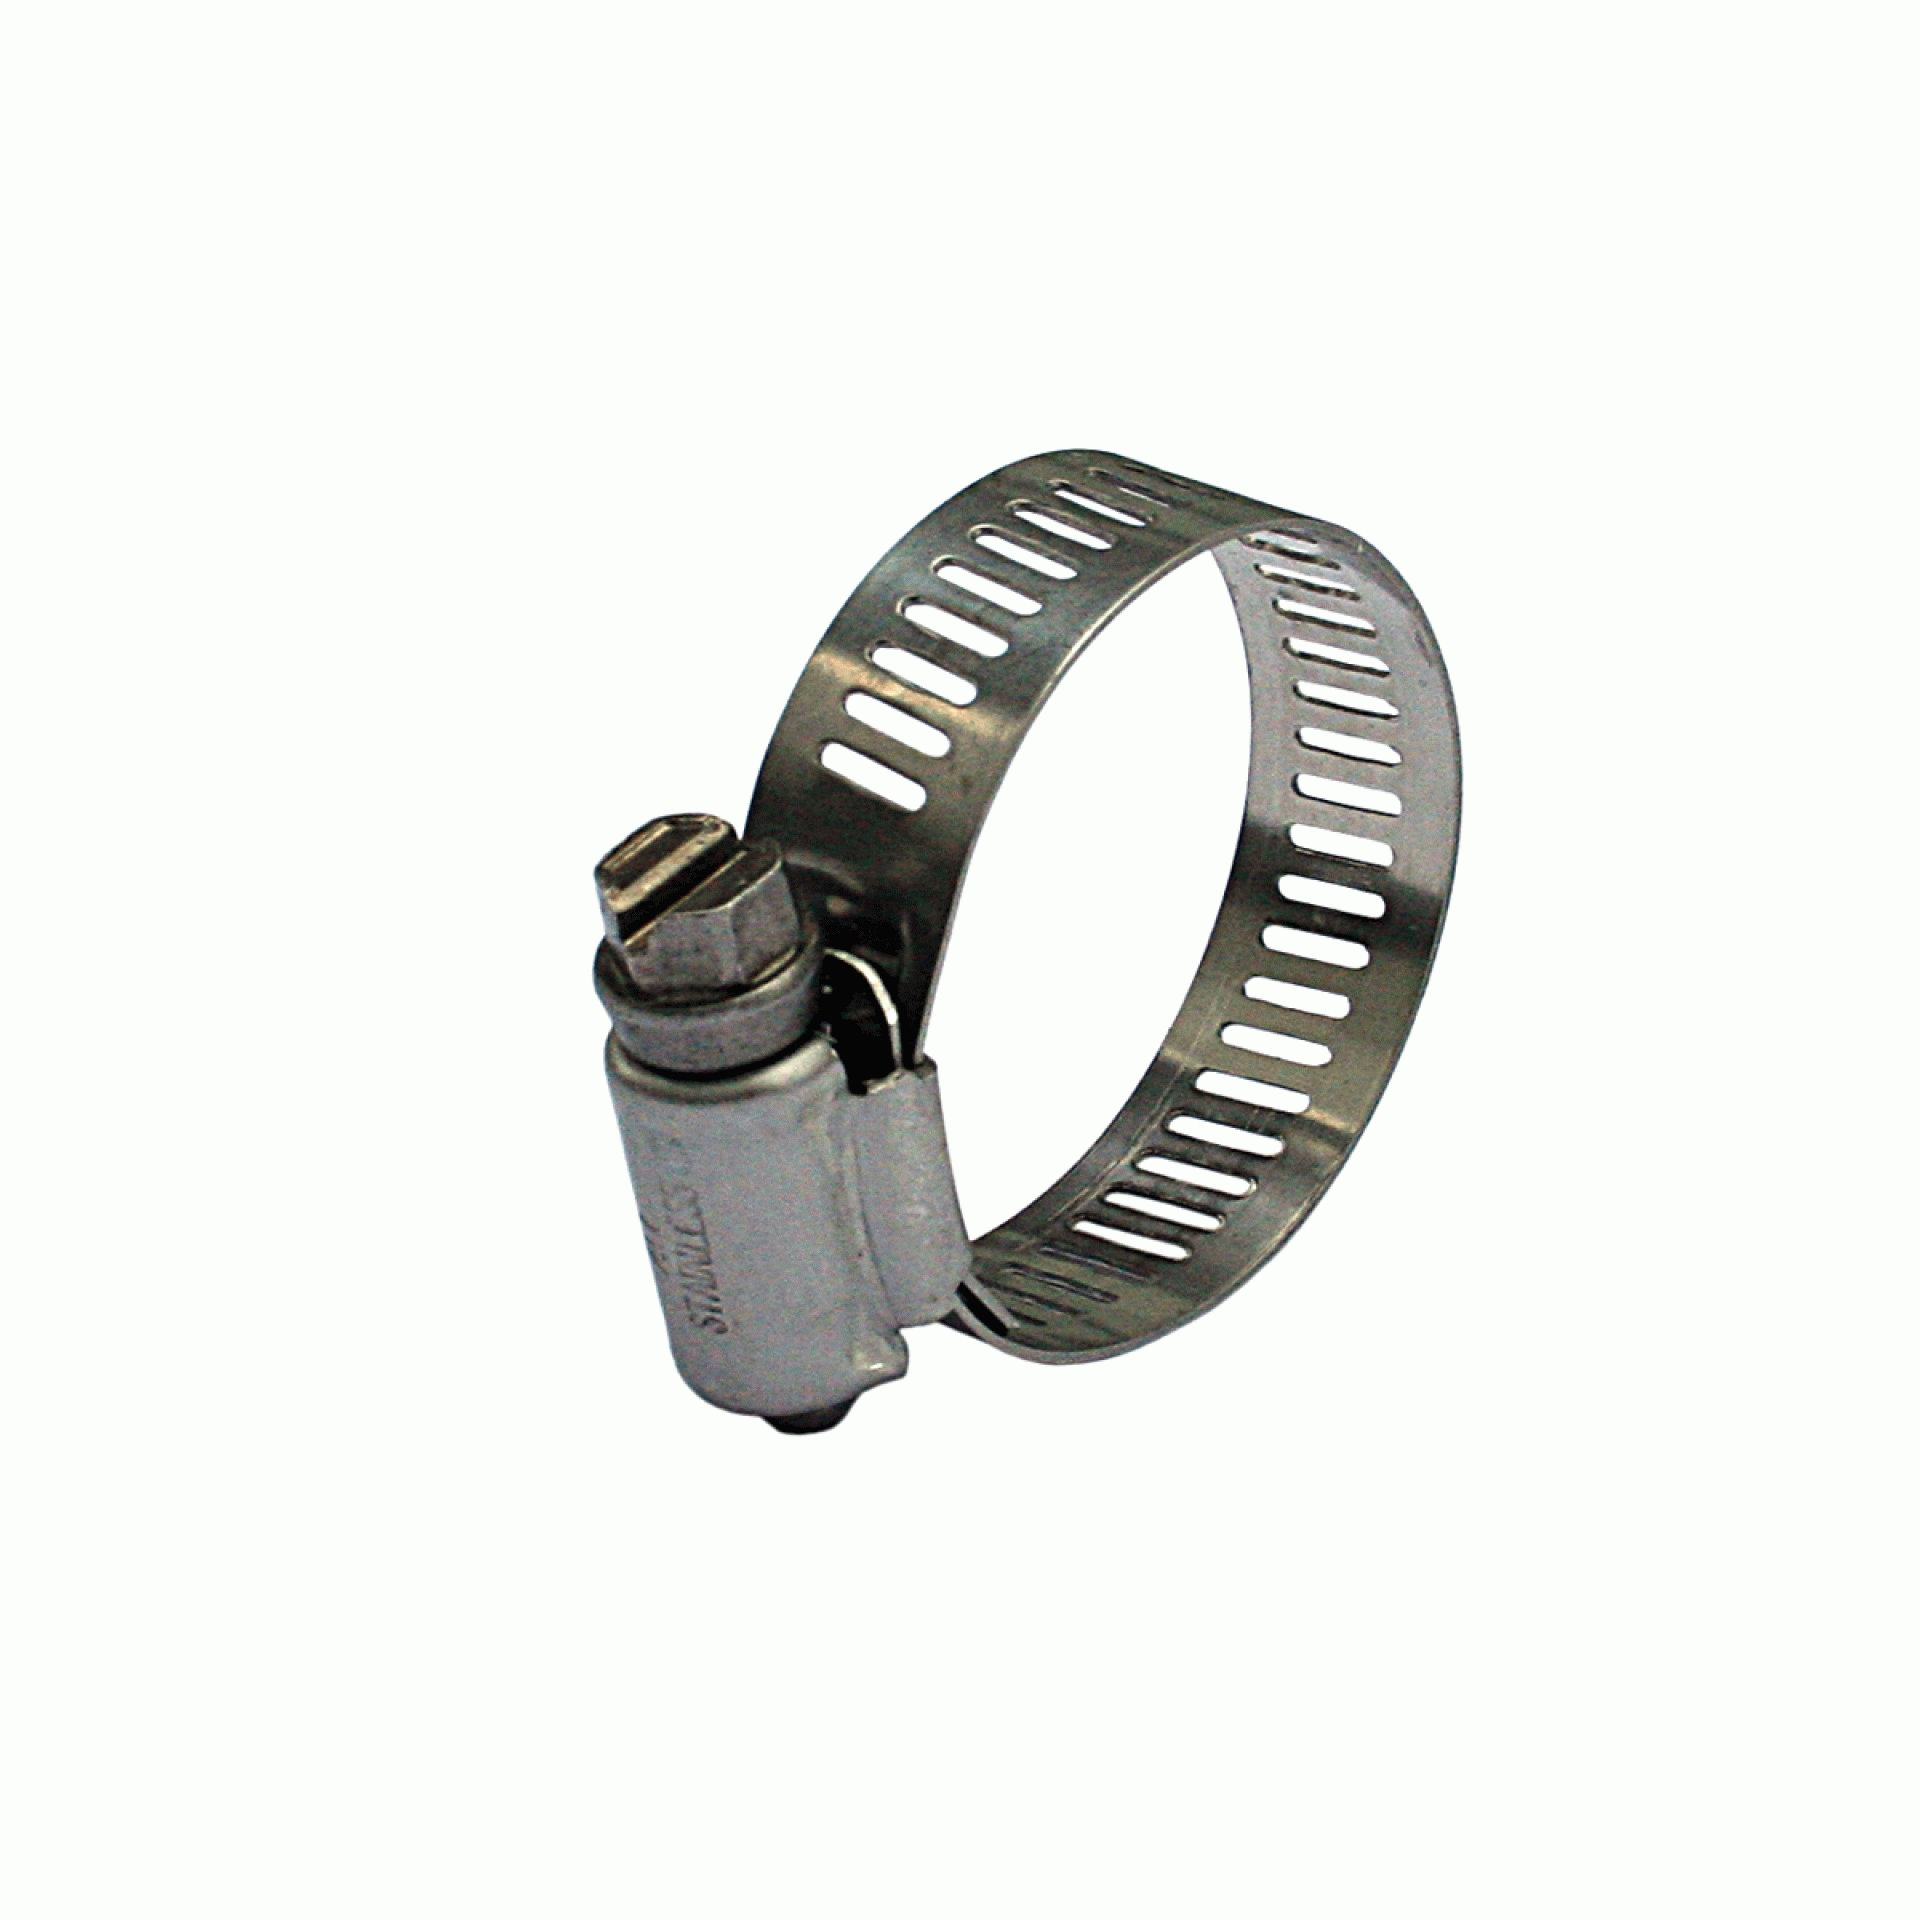 DUPAGE PRODUCTS GROUP | B24HS | STAINLESS STEEL DIA. MIN. 1-1/16" MAX. 2" FITS HOSE: 1-1/4" TO 1-1/2"